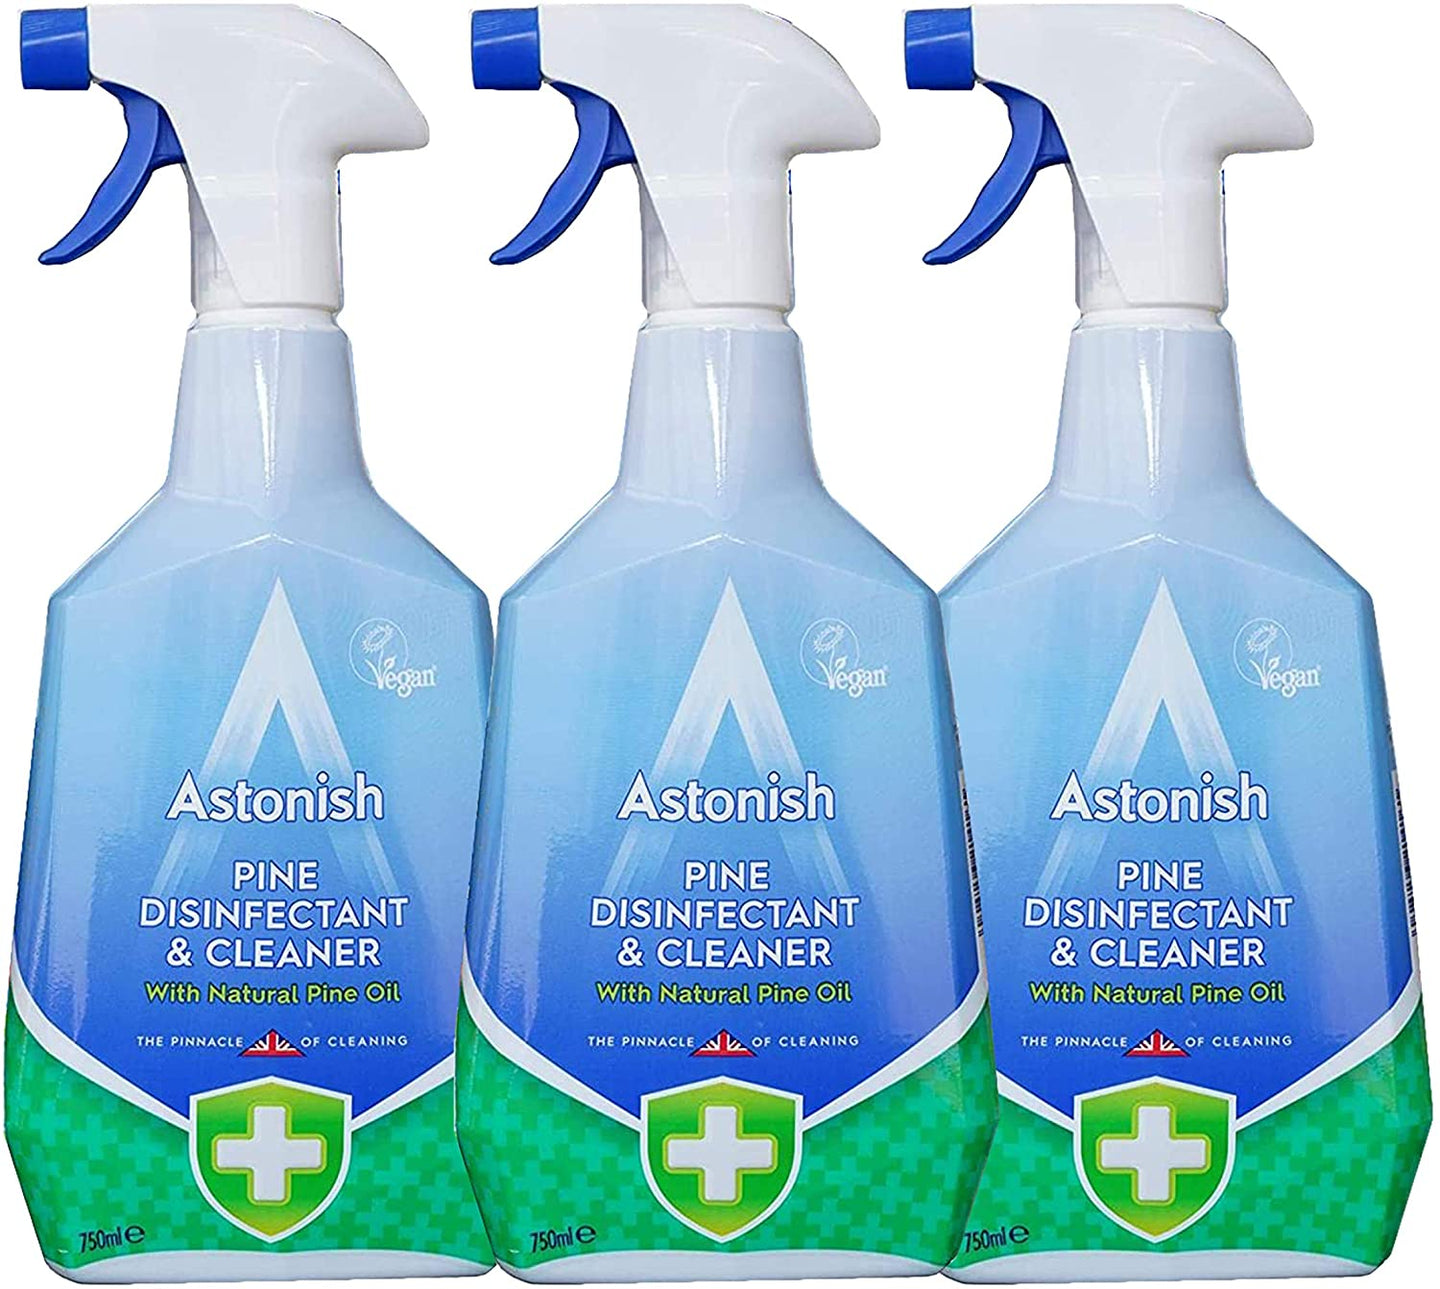 Astonish Pine Multisurface Disinfectant & Cleaner Spray, 25.3 Ounce (Pack of 3)